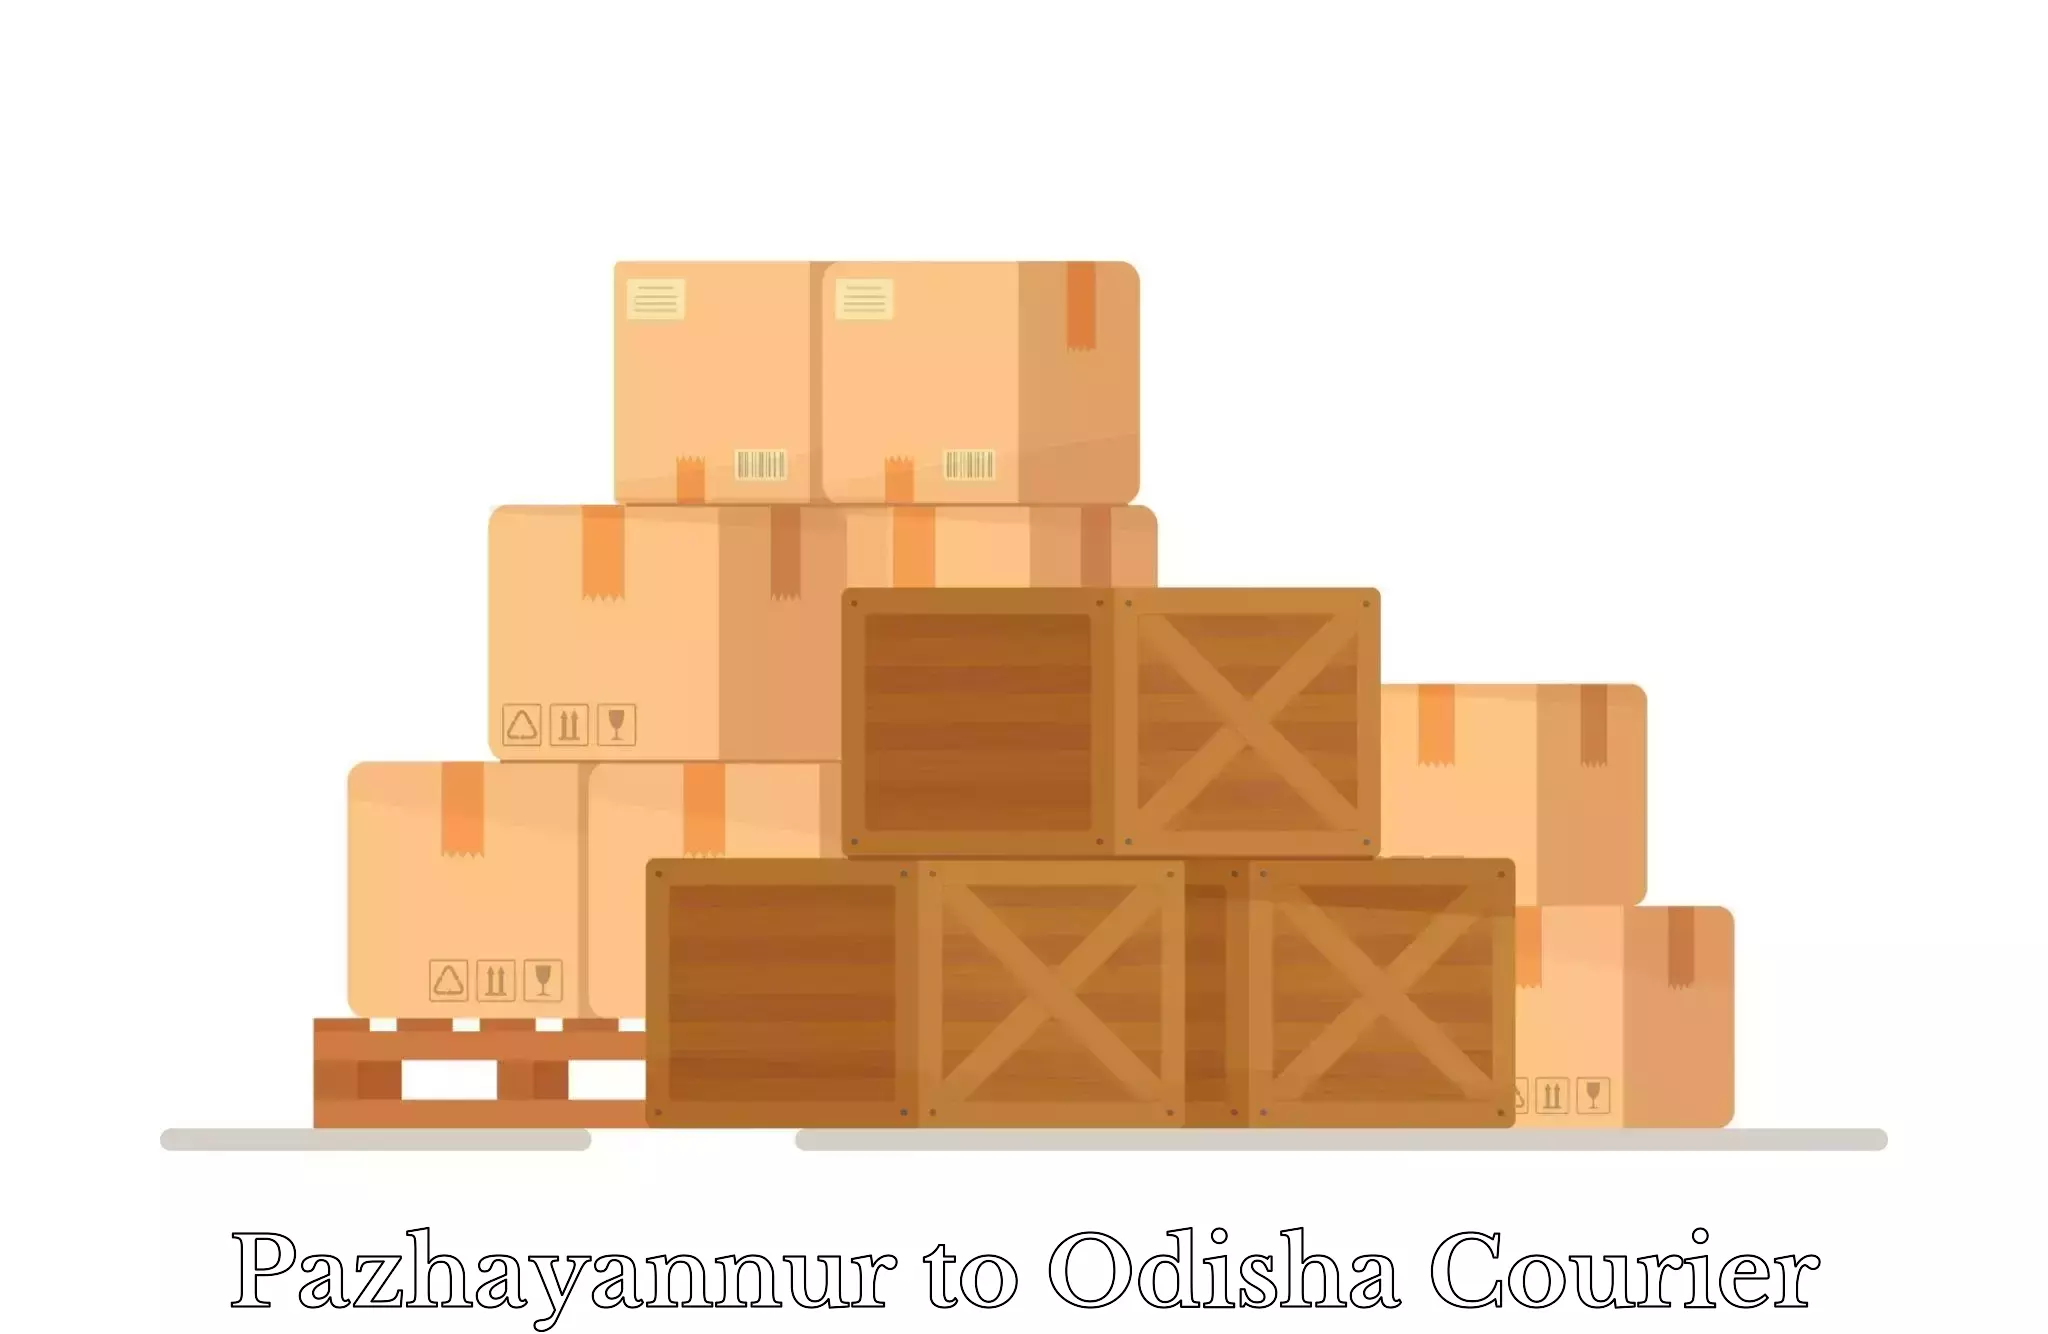 Luggage transport consulting in Pazhayannur to Odisha